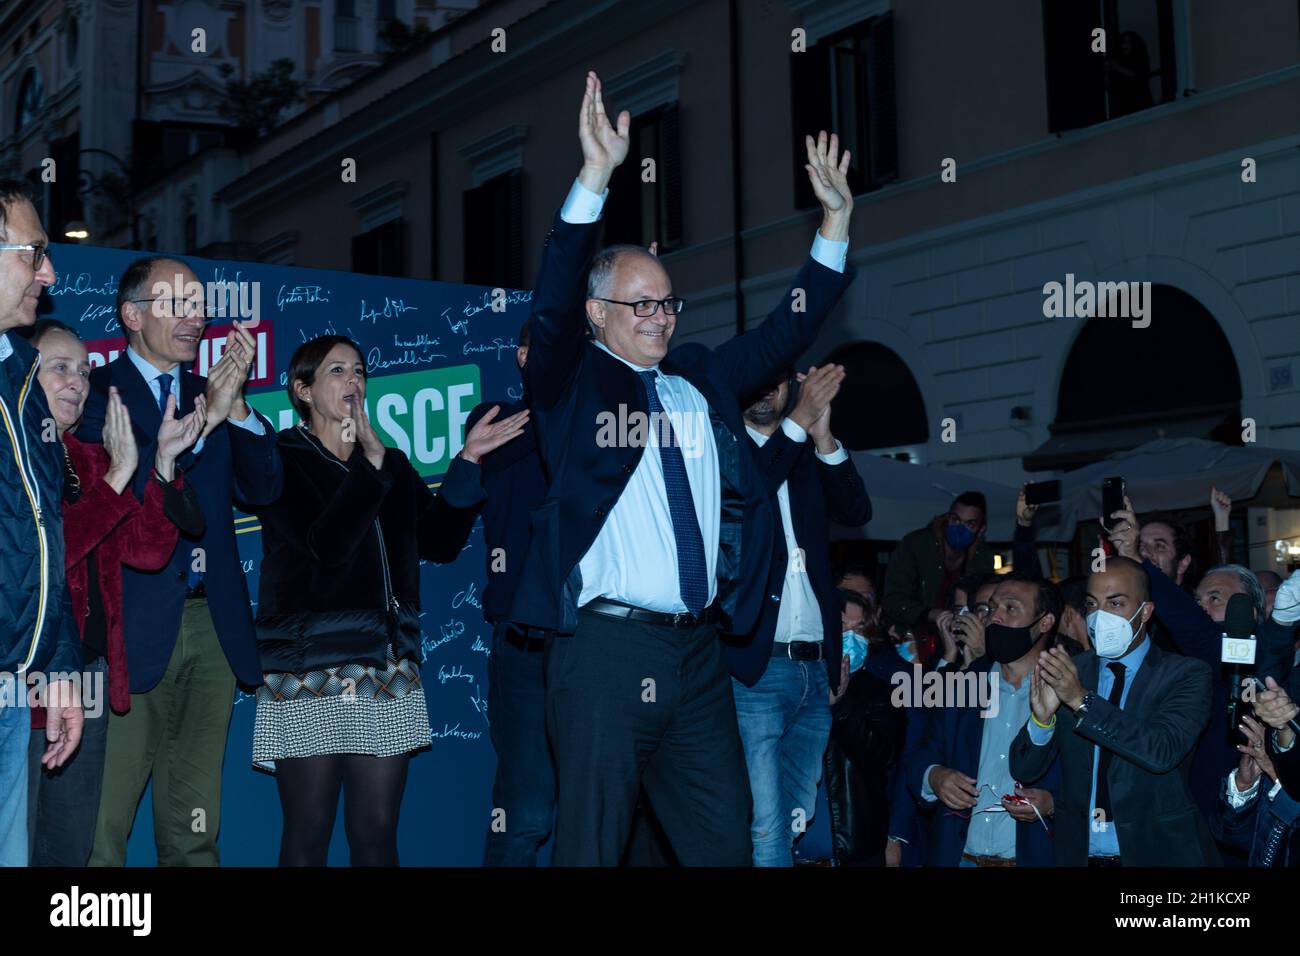 Rome Italy. 18 October 2021. Newly elected mayor of Rome, center-left candidate, Roberto Gualtieri addresses supporters as he celebrates his victory in Rome. Credit: Cosimo Martemucci / Alamy Live News Stock Photo